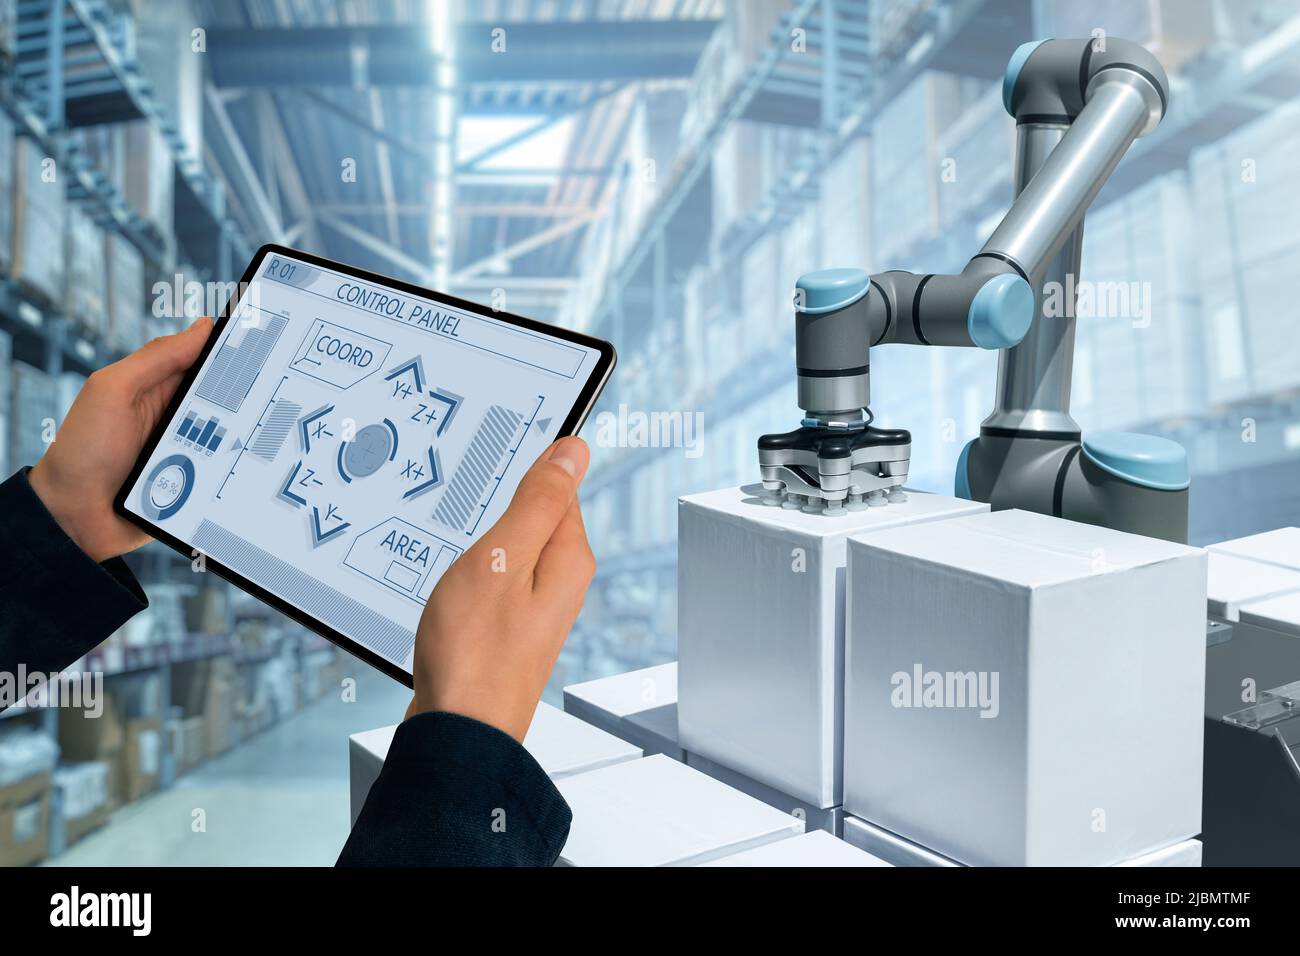 Warehouse manager with digital tablet controls robot arm Stock Photo